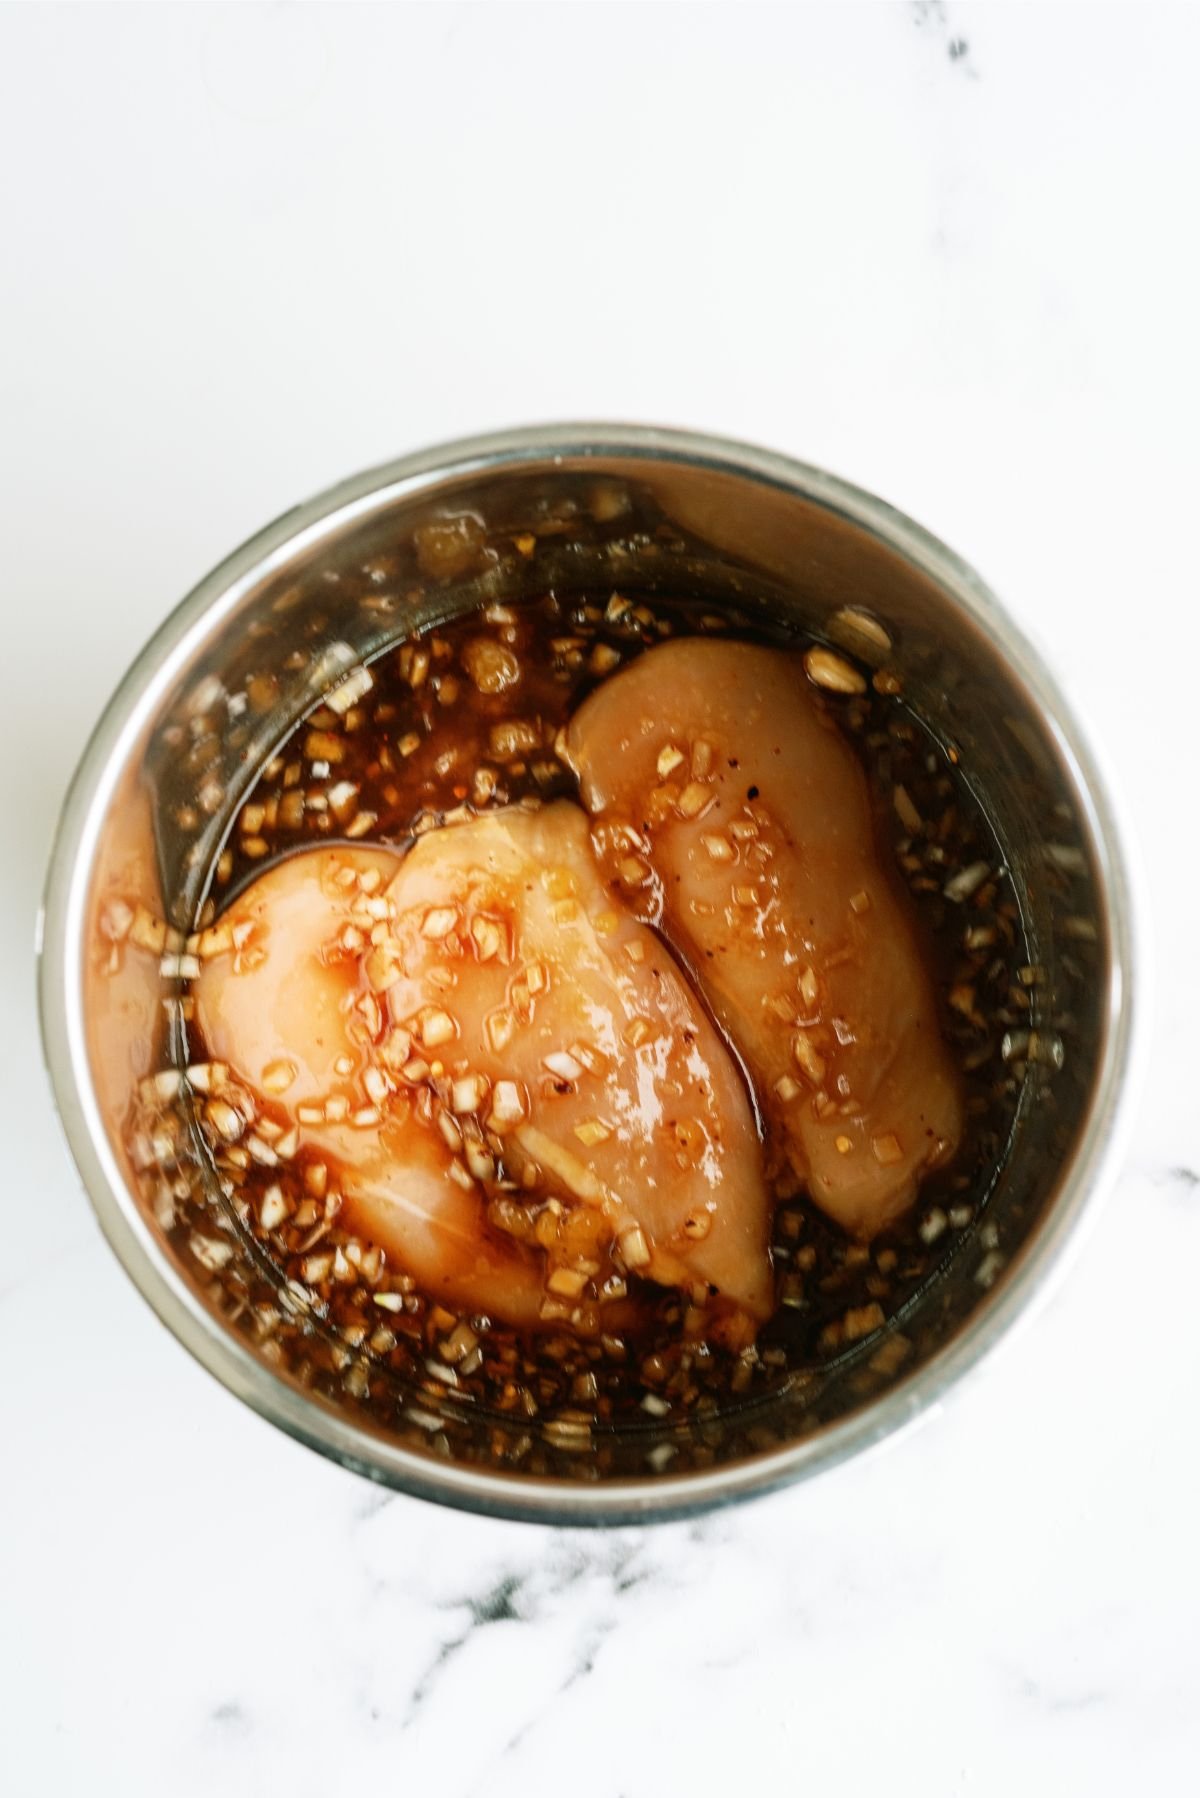 Chicken breast in the Instant Pot with sauce poured over the chicken